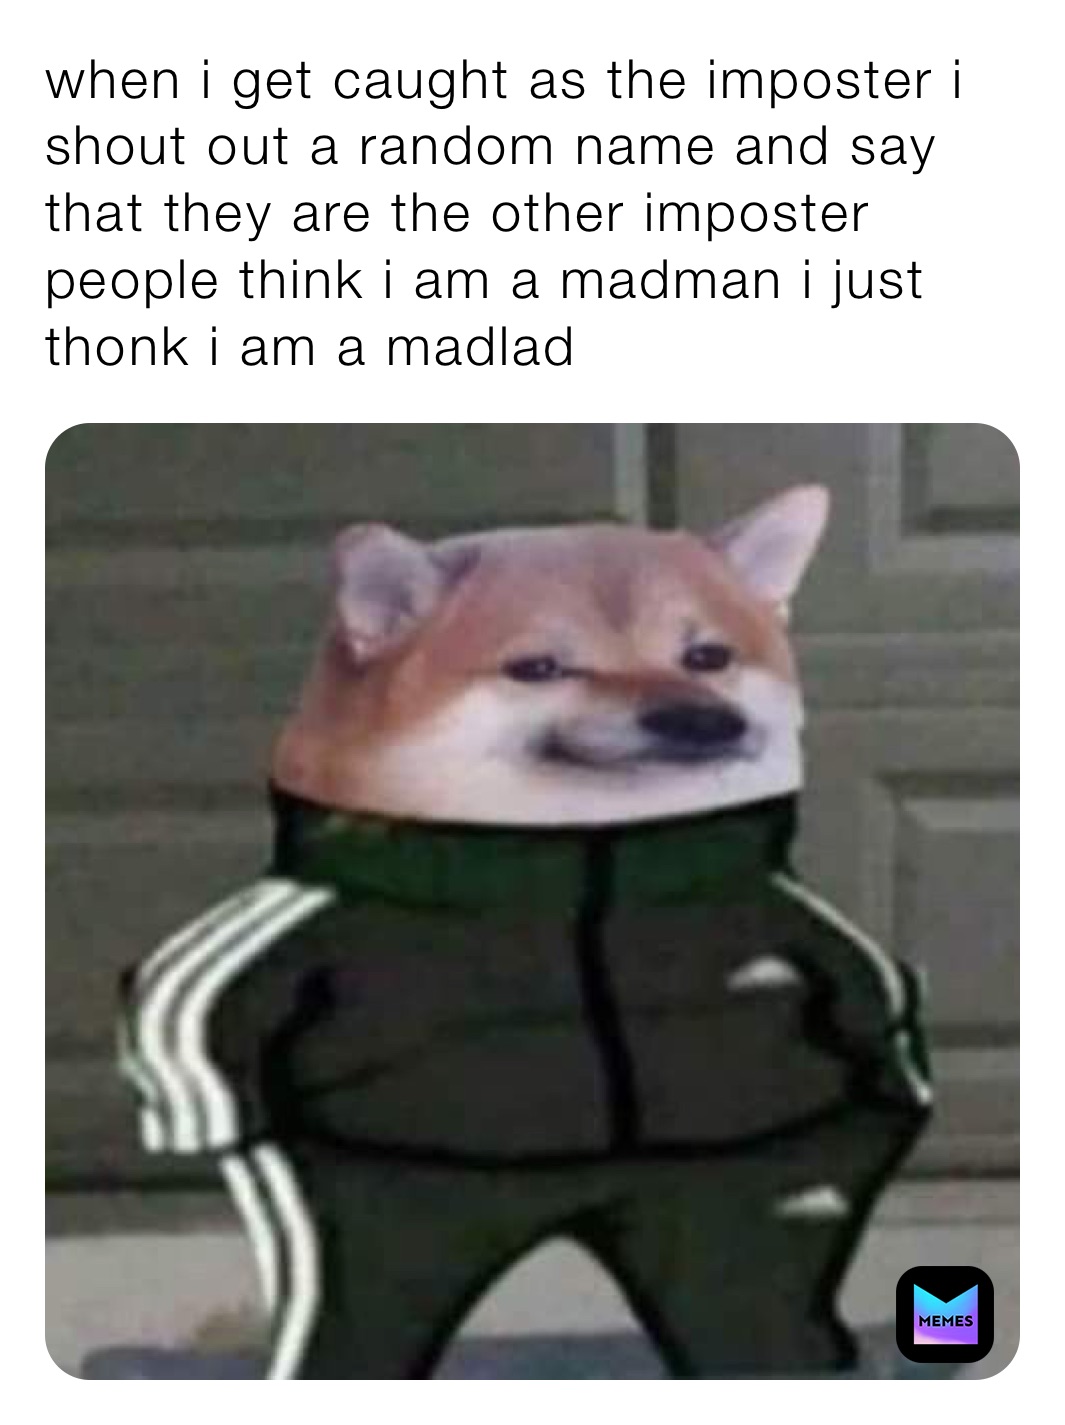 when i get caught as the imposter i shout out a random name and say that they are the other imposter people think i am a madman i just thonk i am a madlad